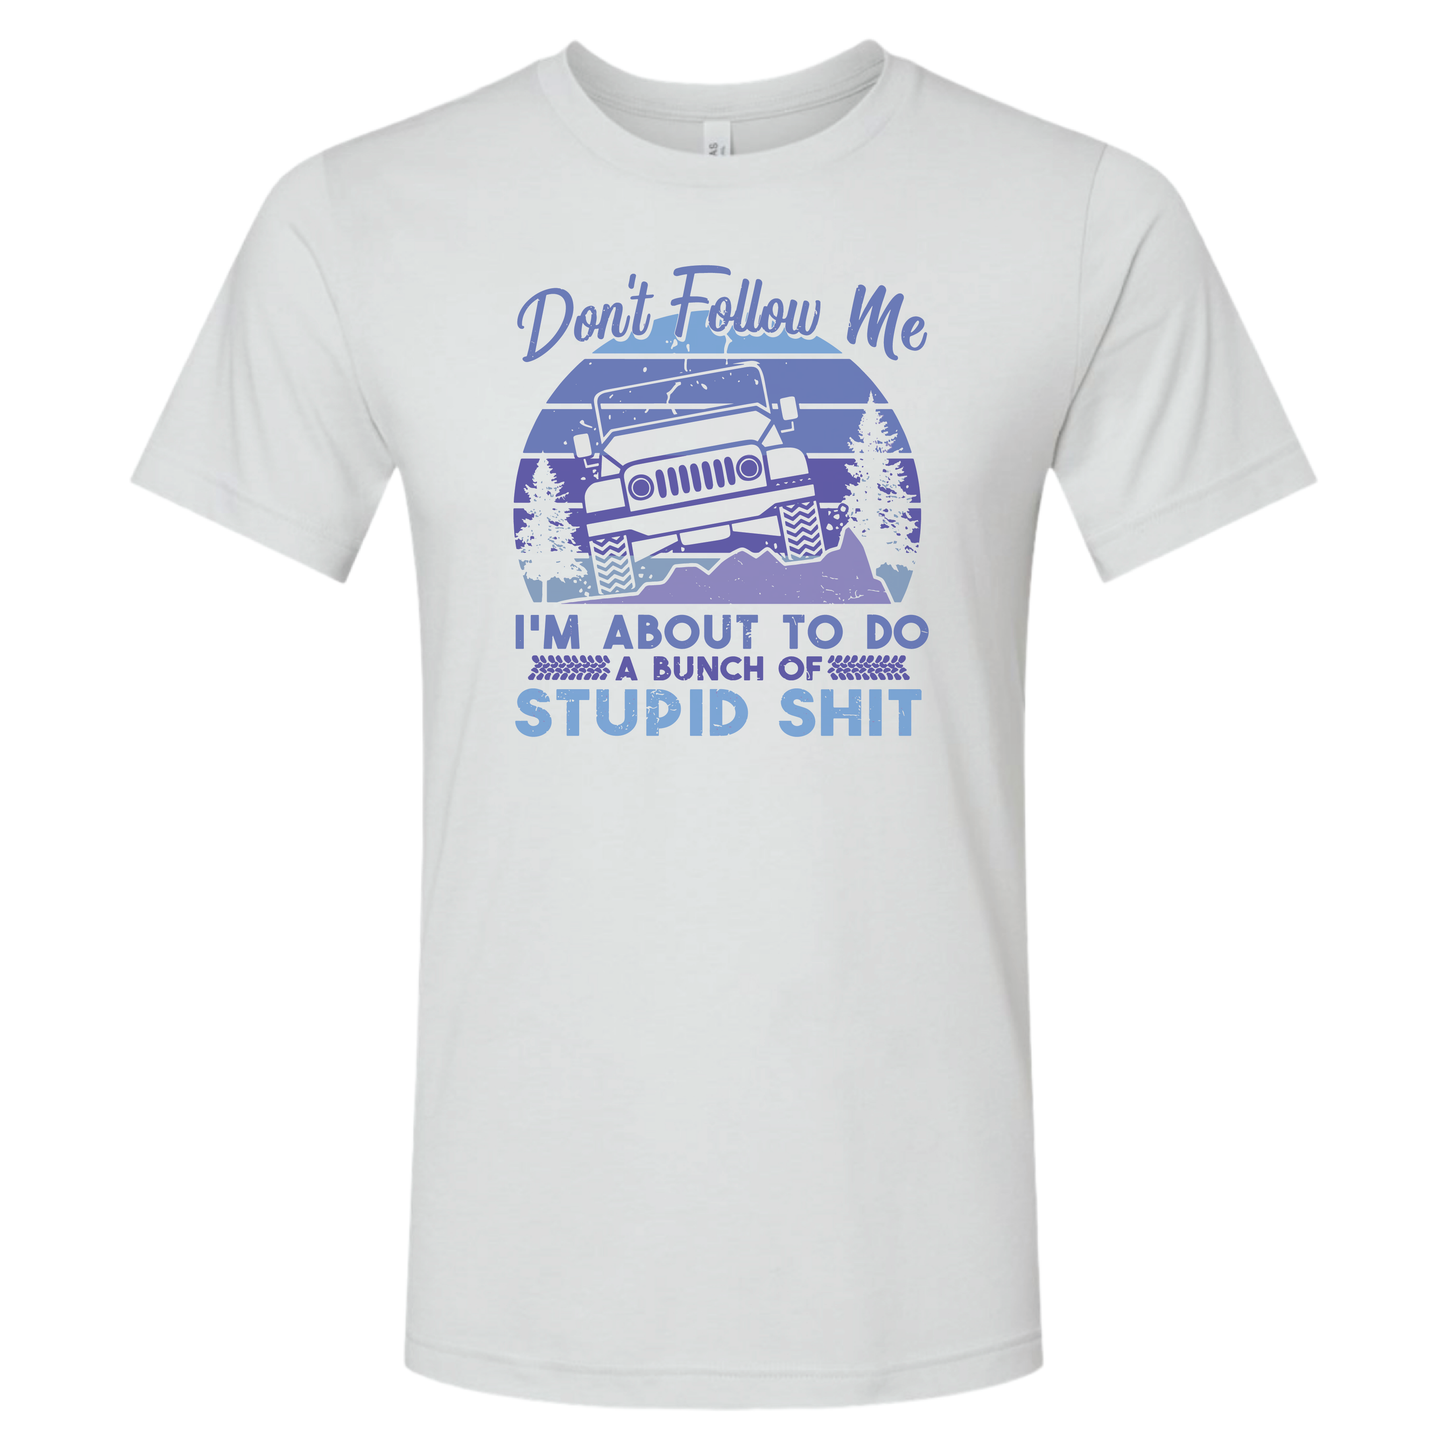 Stupid Shit - Shirt, Tank Top, Long Sleeve or Hoodie - Available in Multiple Colors